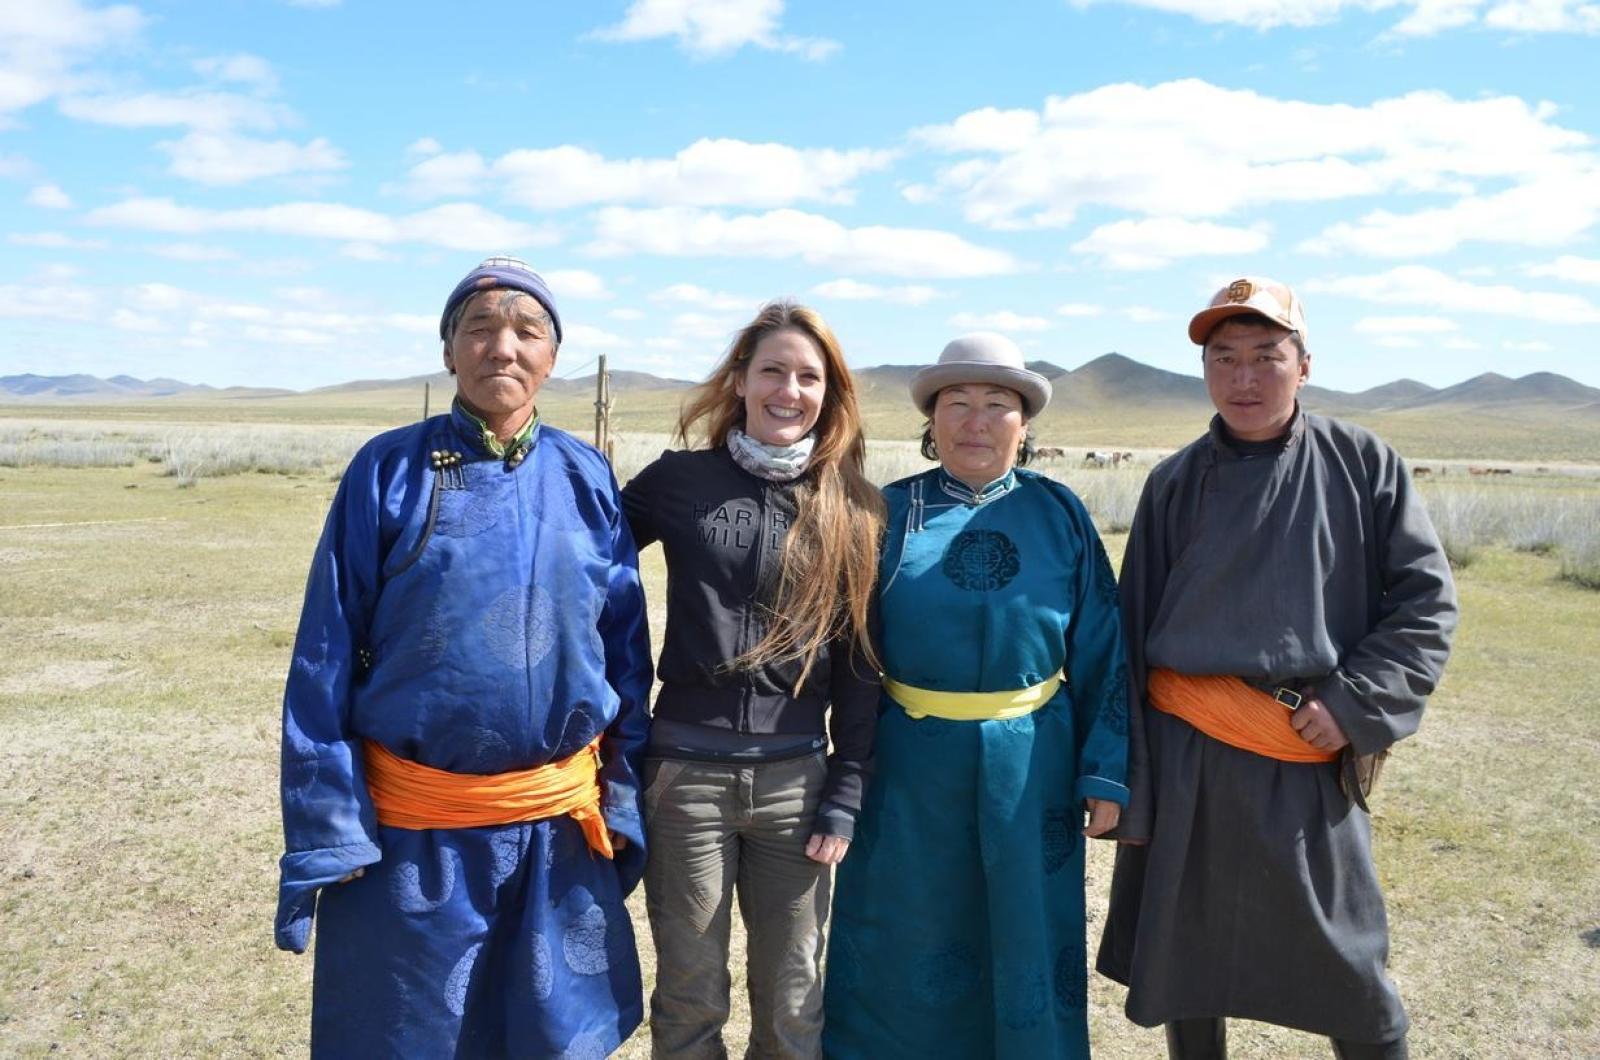 A Projects Abroad volunteer with her host family during her Nomad Project in Mongolia.